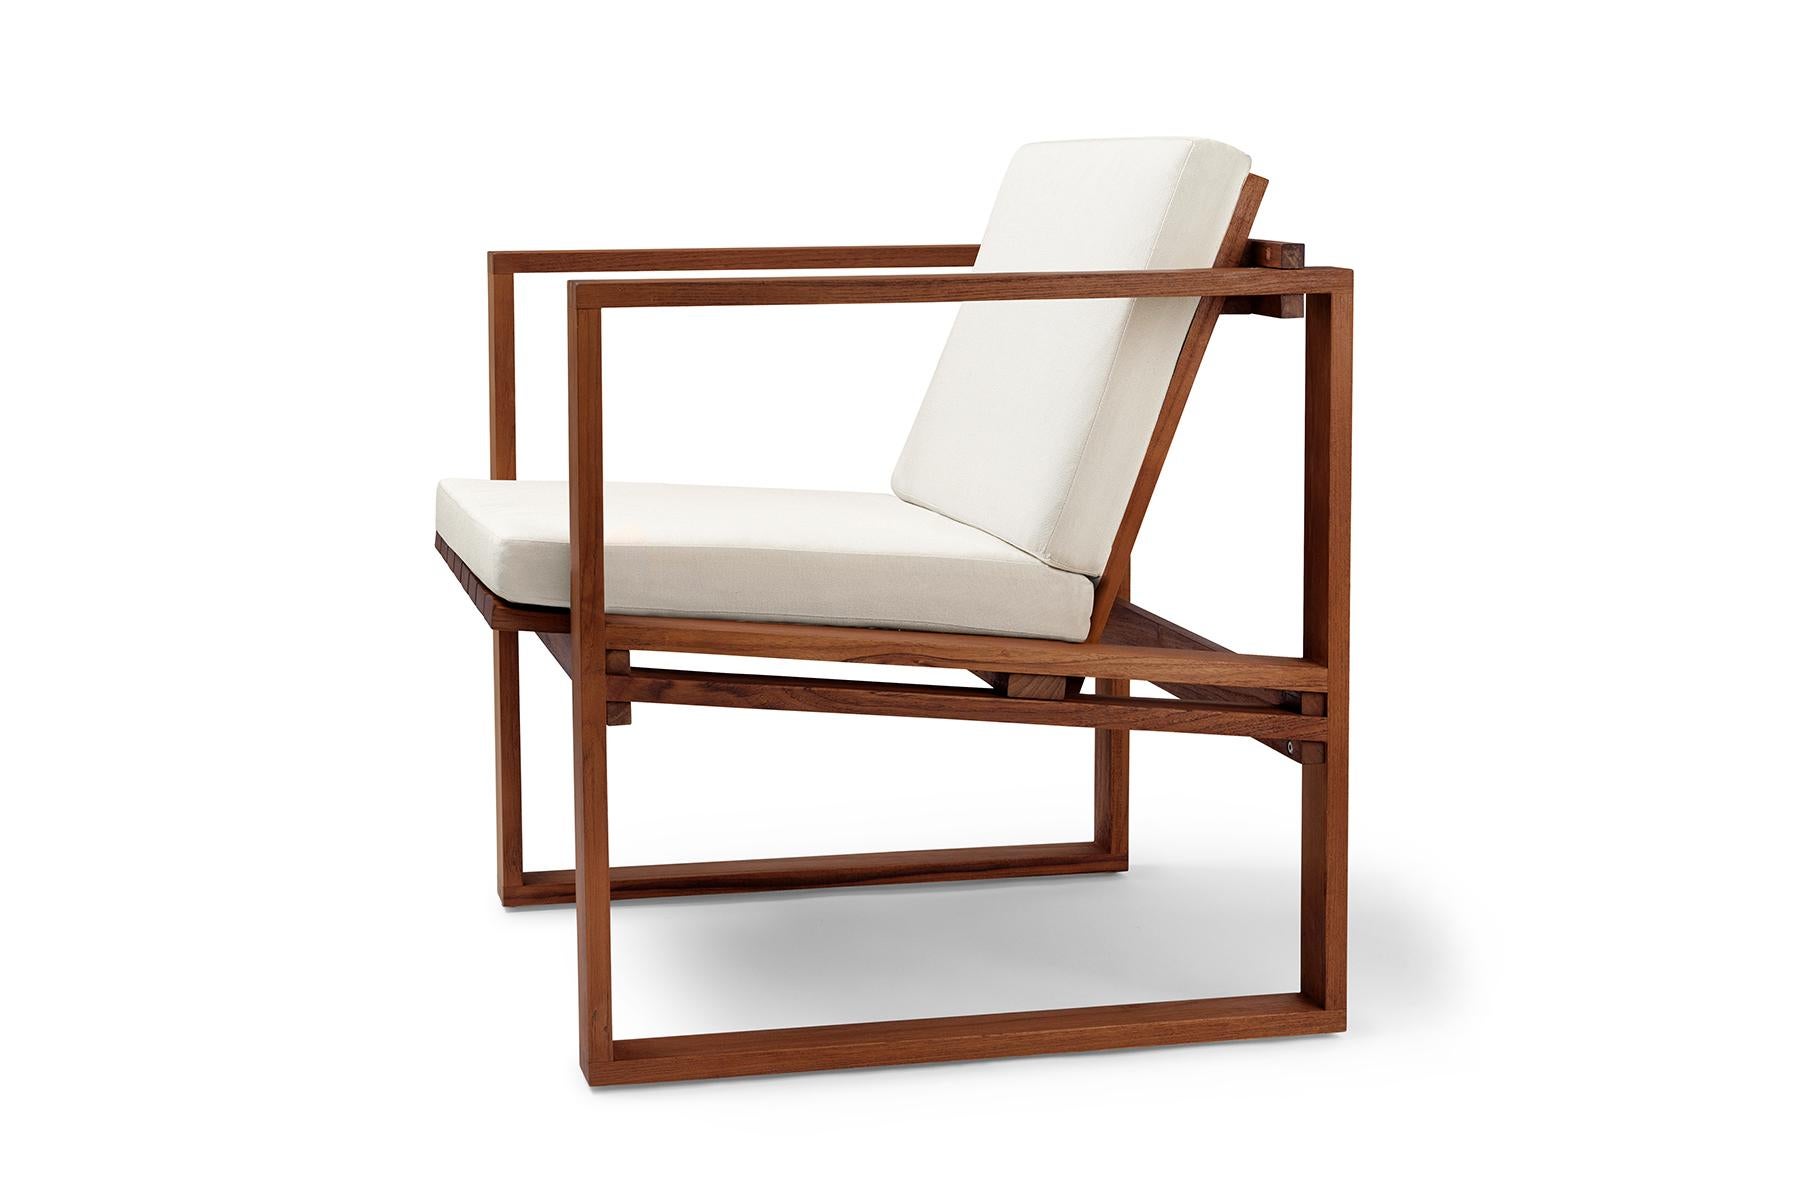 The BK11 lounge chair was designed in 1959 by Danish architect Bodil Kjær as part of her architecturally inspired Indoor-Outdoor Series. With a linear form influenced by Cubism, the chair’s solid teak construction is designed to patinate beautifully